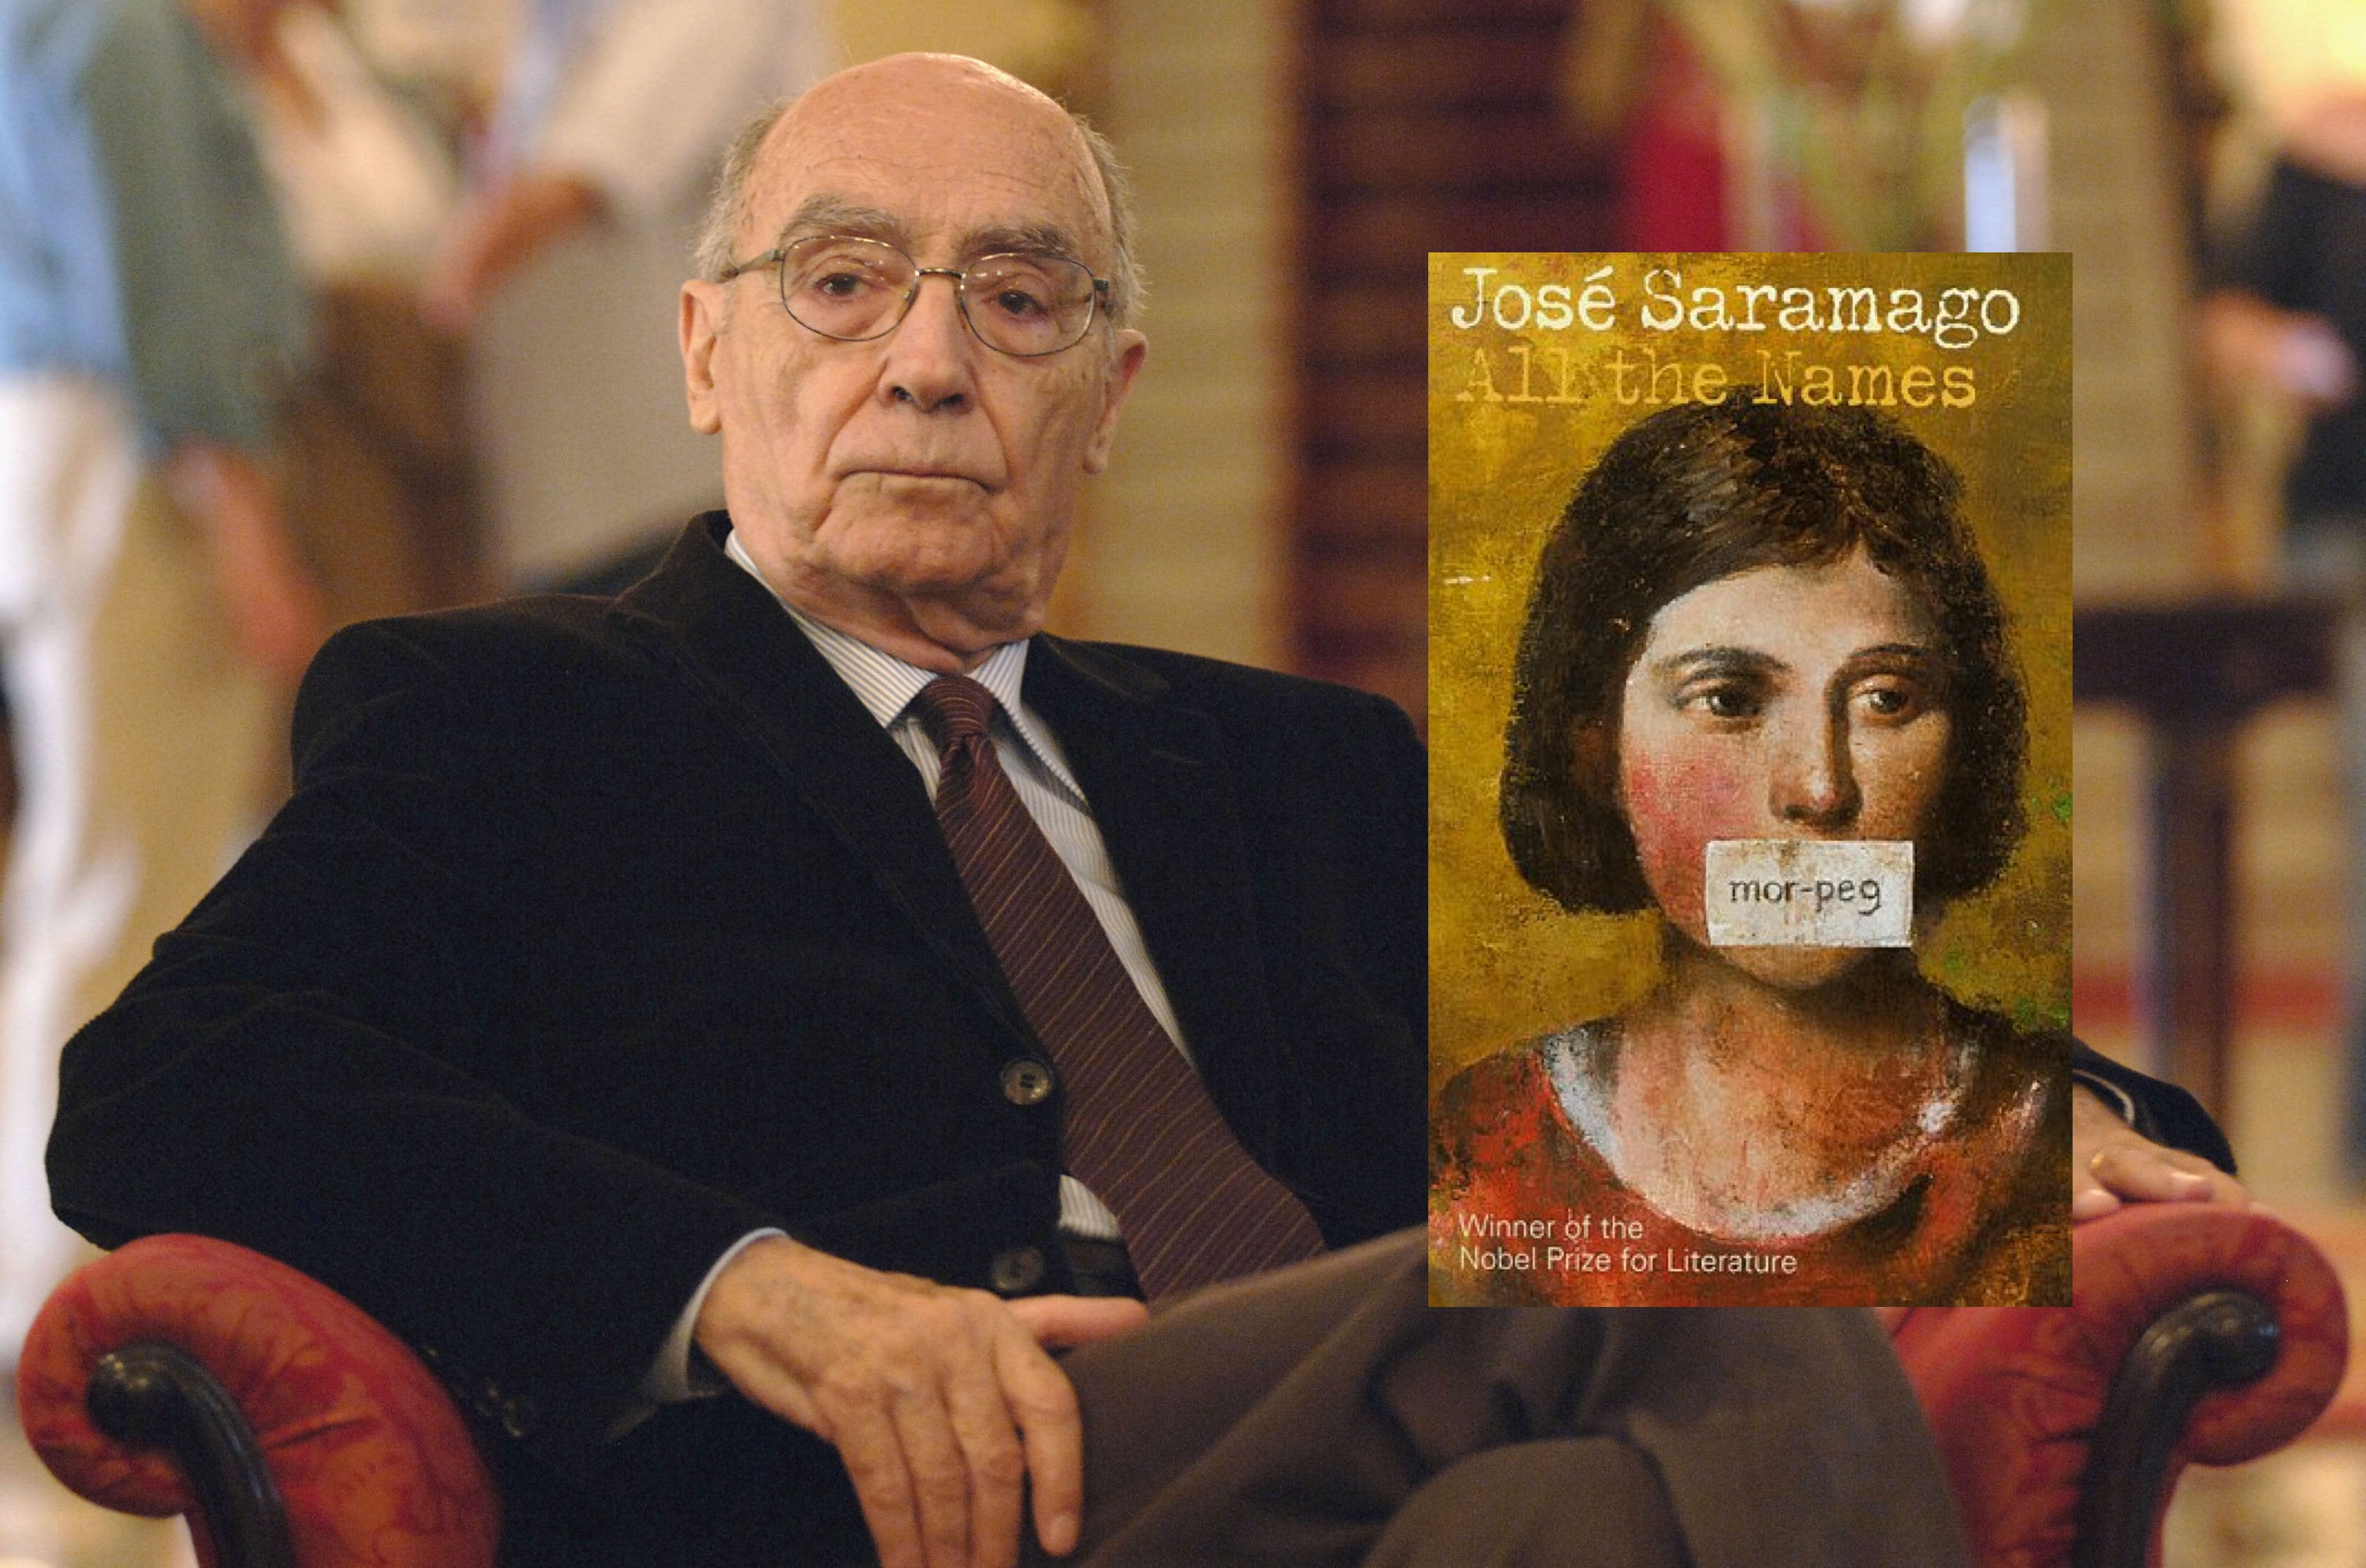 José Saramago in 2006 and the UK first edition of ‘All the Names’, published in 1999, the year after he was awarded the Nobel Prize in Literature